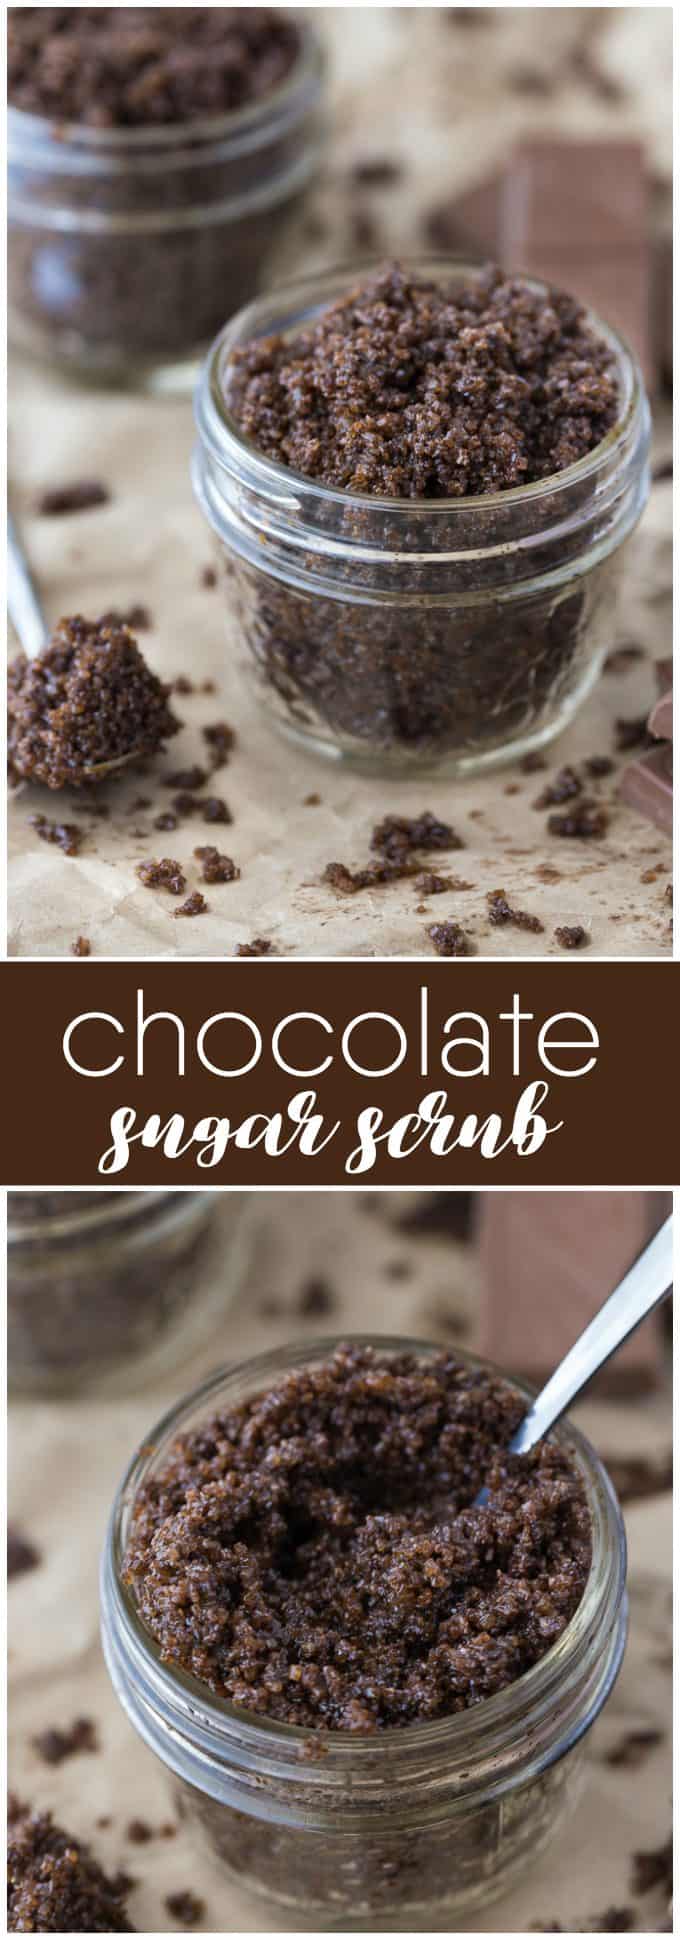 Chocolate Sugar Scrub - Luxurious and decadent! You may be tempted to eat this sweet scrub, but resist if you can. It feels amazing on your skin.